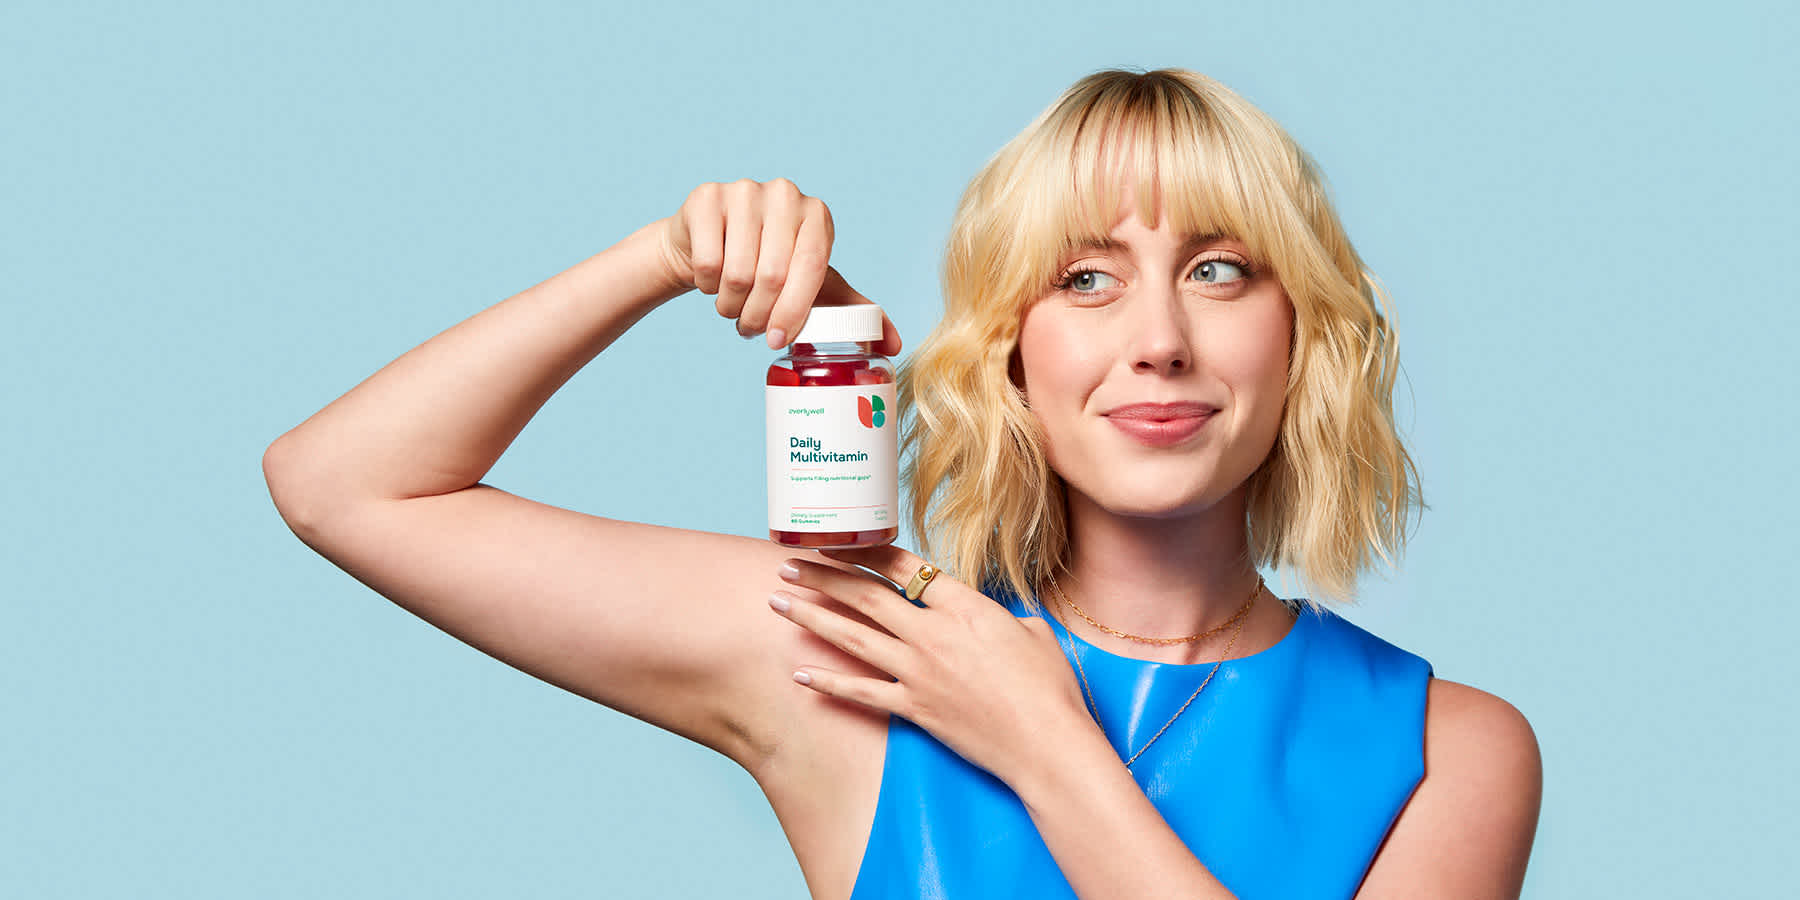 Smiling woman holding bottle of multivitamin supplements with trace minerals